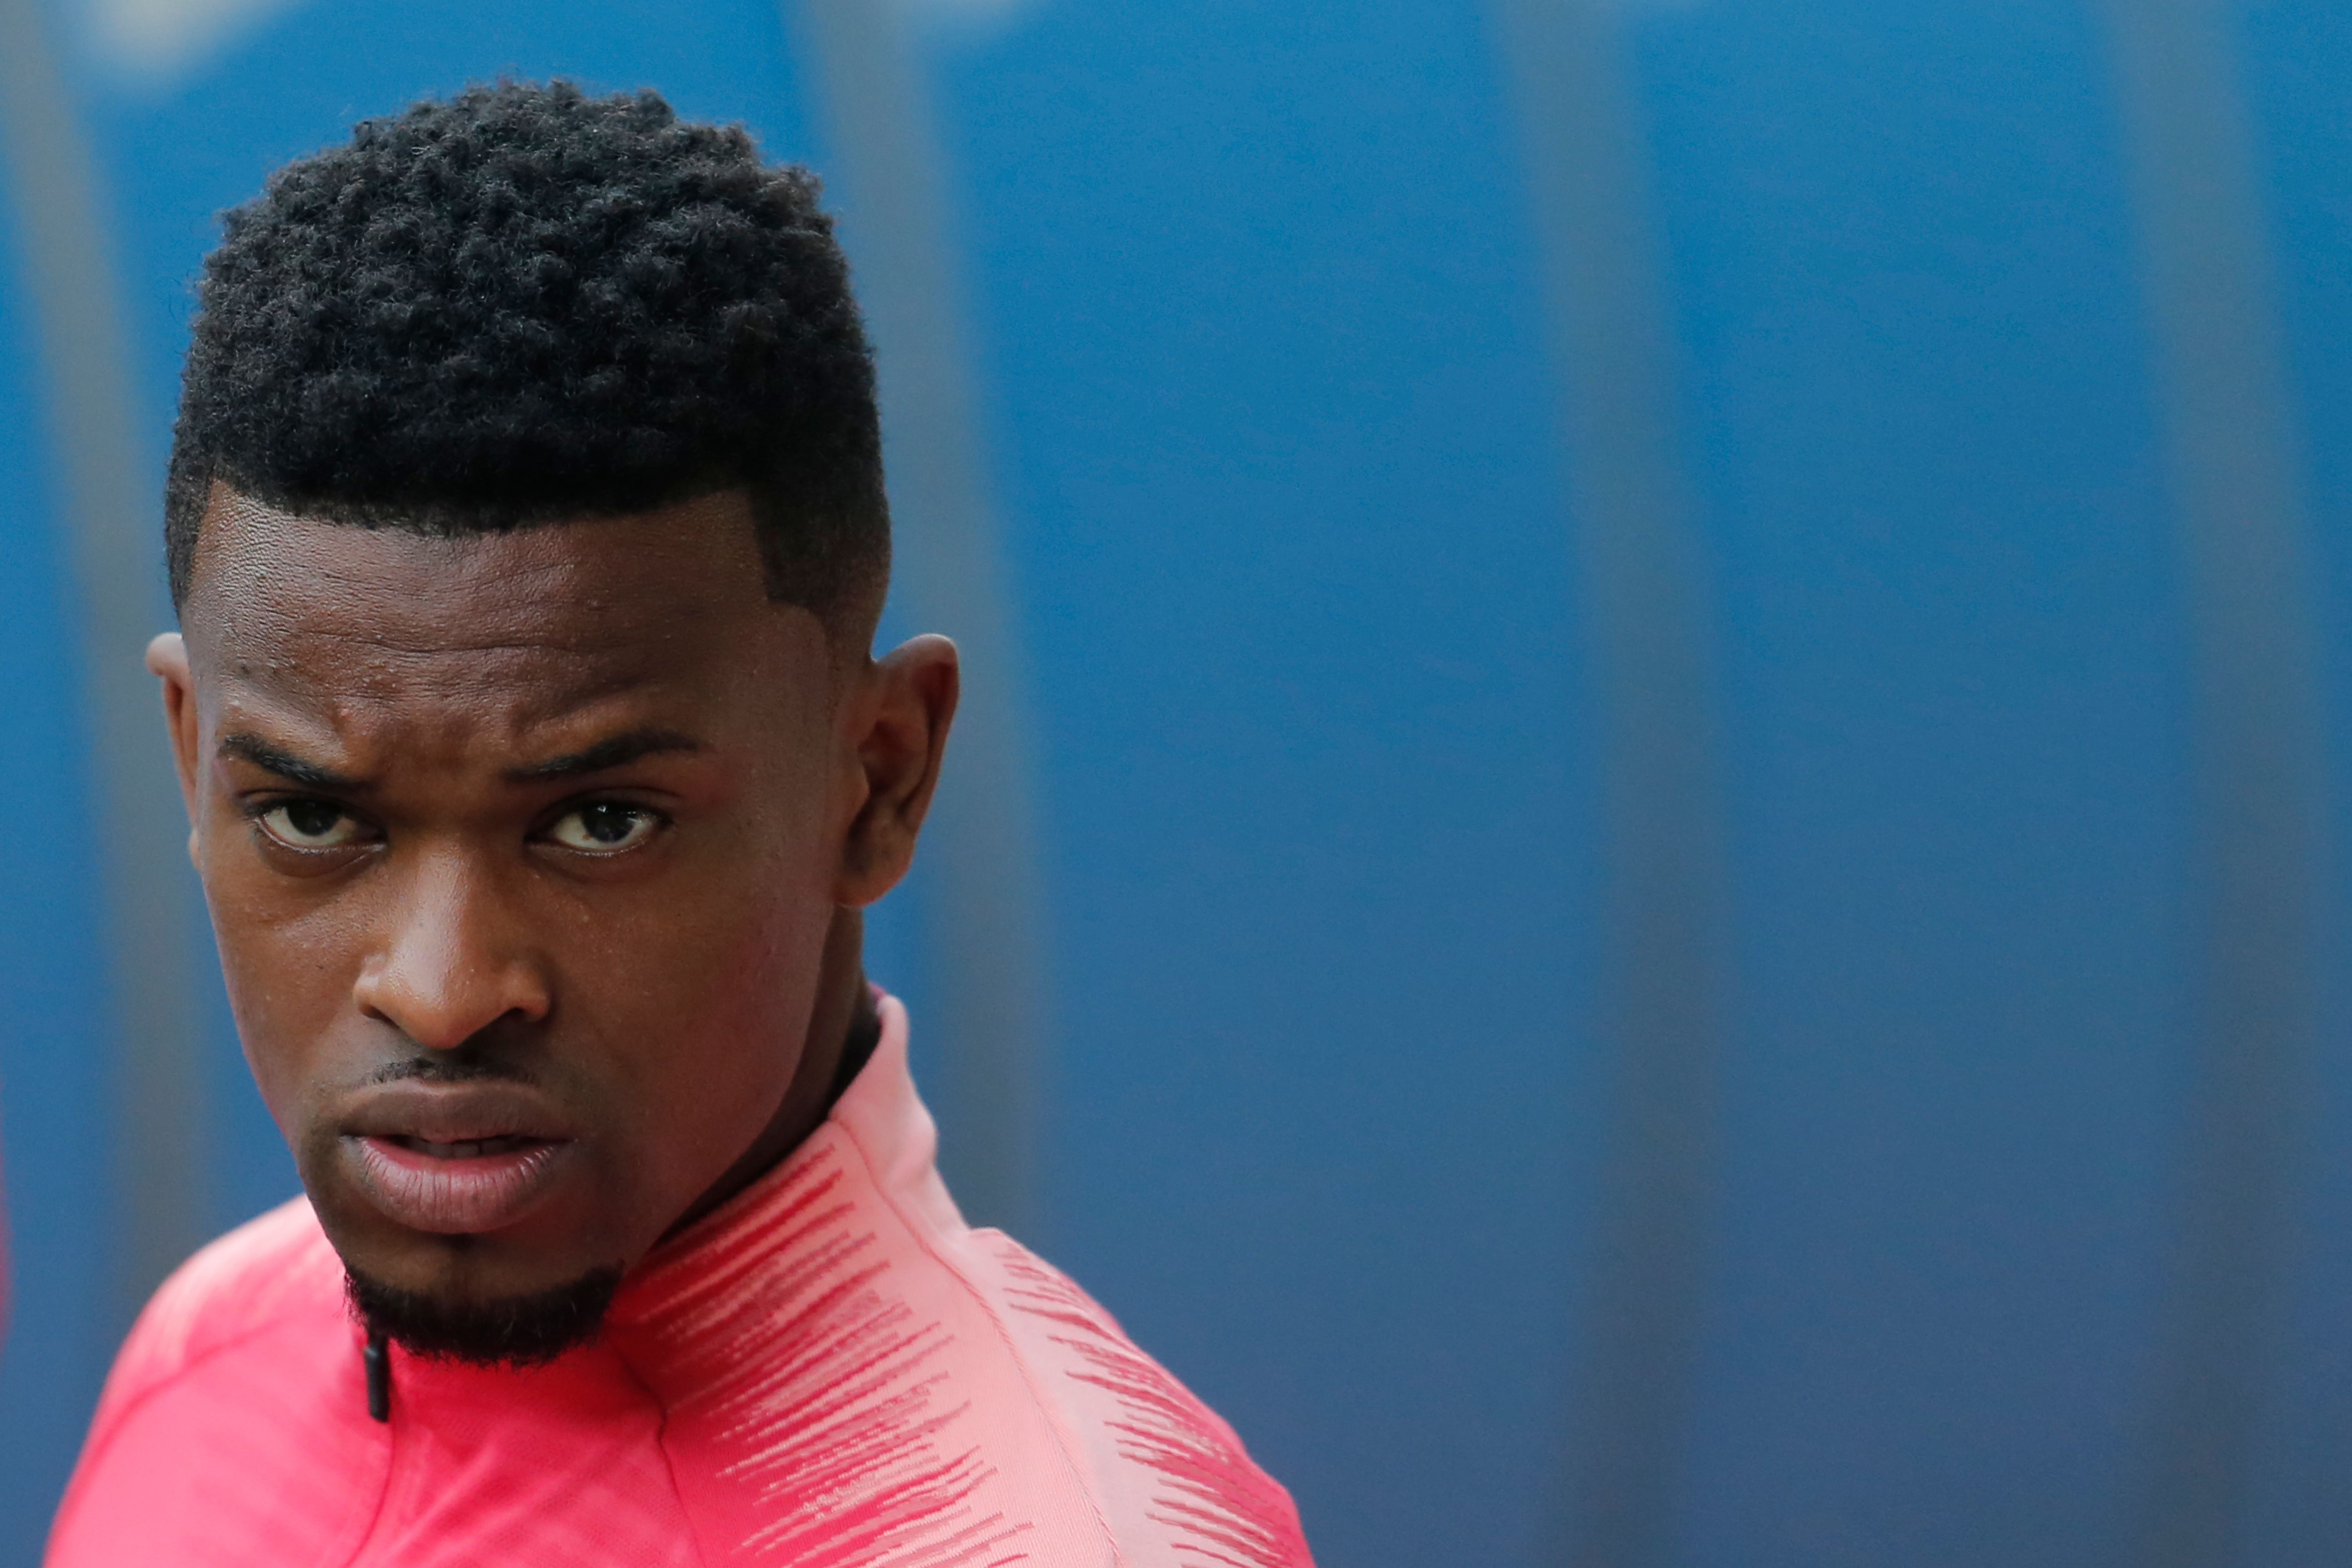 Barcelona's Portuguese defender Nelson Semedo attends a training session at the Joan Gamper Sports Center in Sant Joan Despi on April 15, 2019 on the eve of the Champions League second leg quarter-final football match between FC Barcelona and Manchester United. (Photo by Pau Barrena / AFP)        (Photo credit should read PAU BARRENA/AFP/Getty Images)